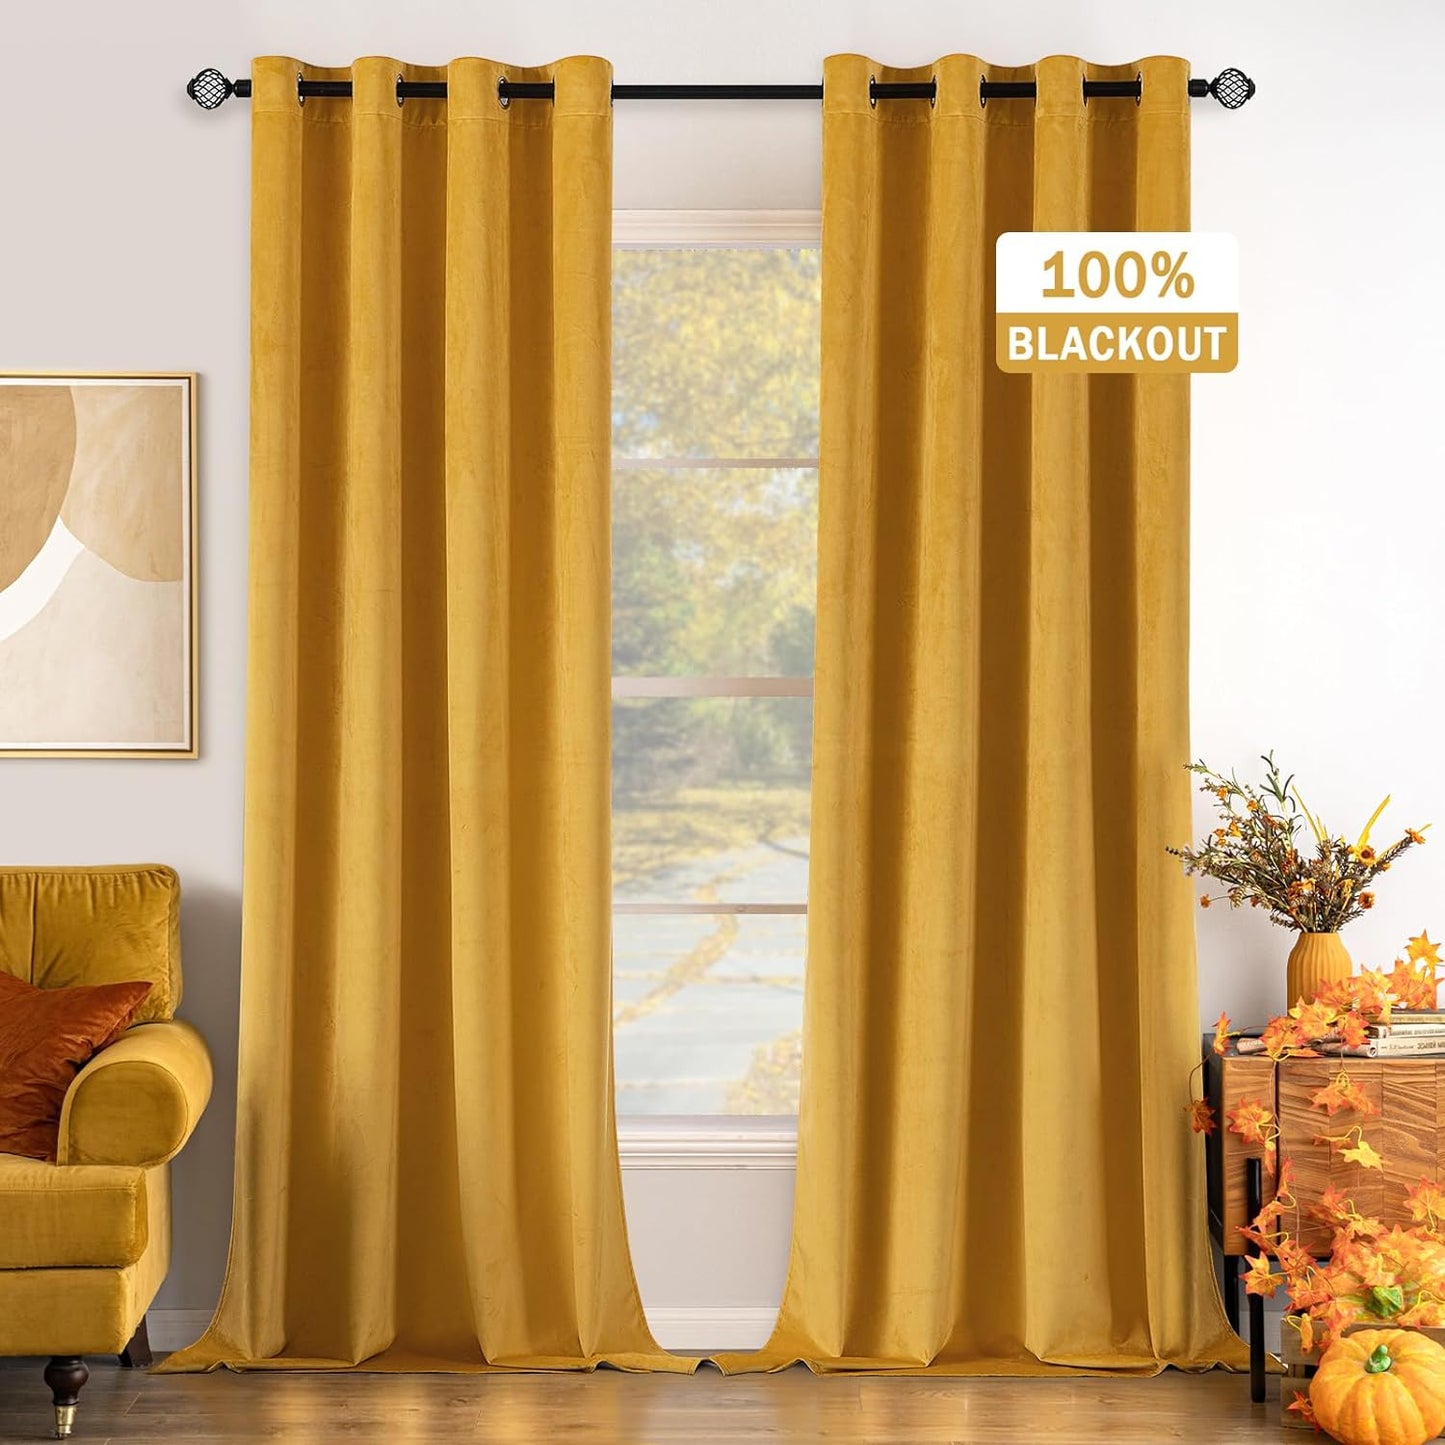 EMEMA Olive Green Velvet Curtains 84 Inch Length 2 Panels Set, Room Darkening Luxury Curtains, Grommet Thermal Insulated Drapes, Window Curtains for Living Room, W52 X L84, Olive Green  EMEMA 100 Blackout/ Yellow W52" X L96" 